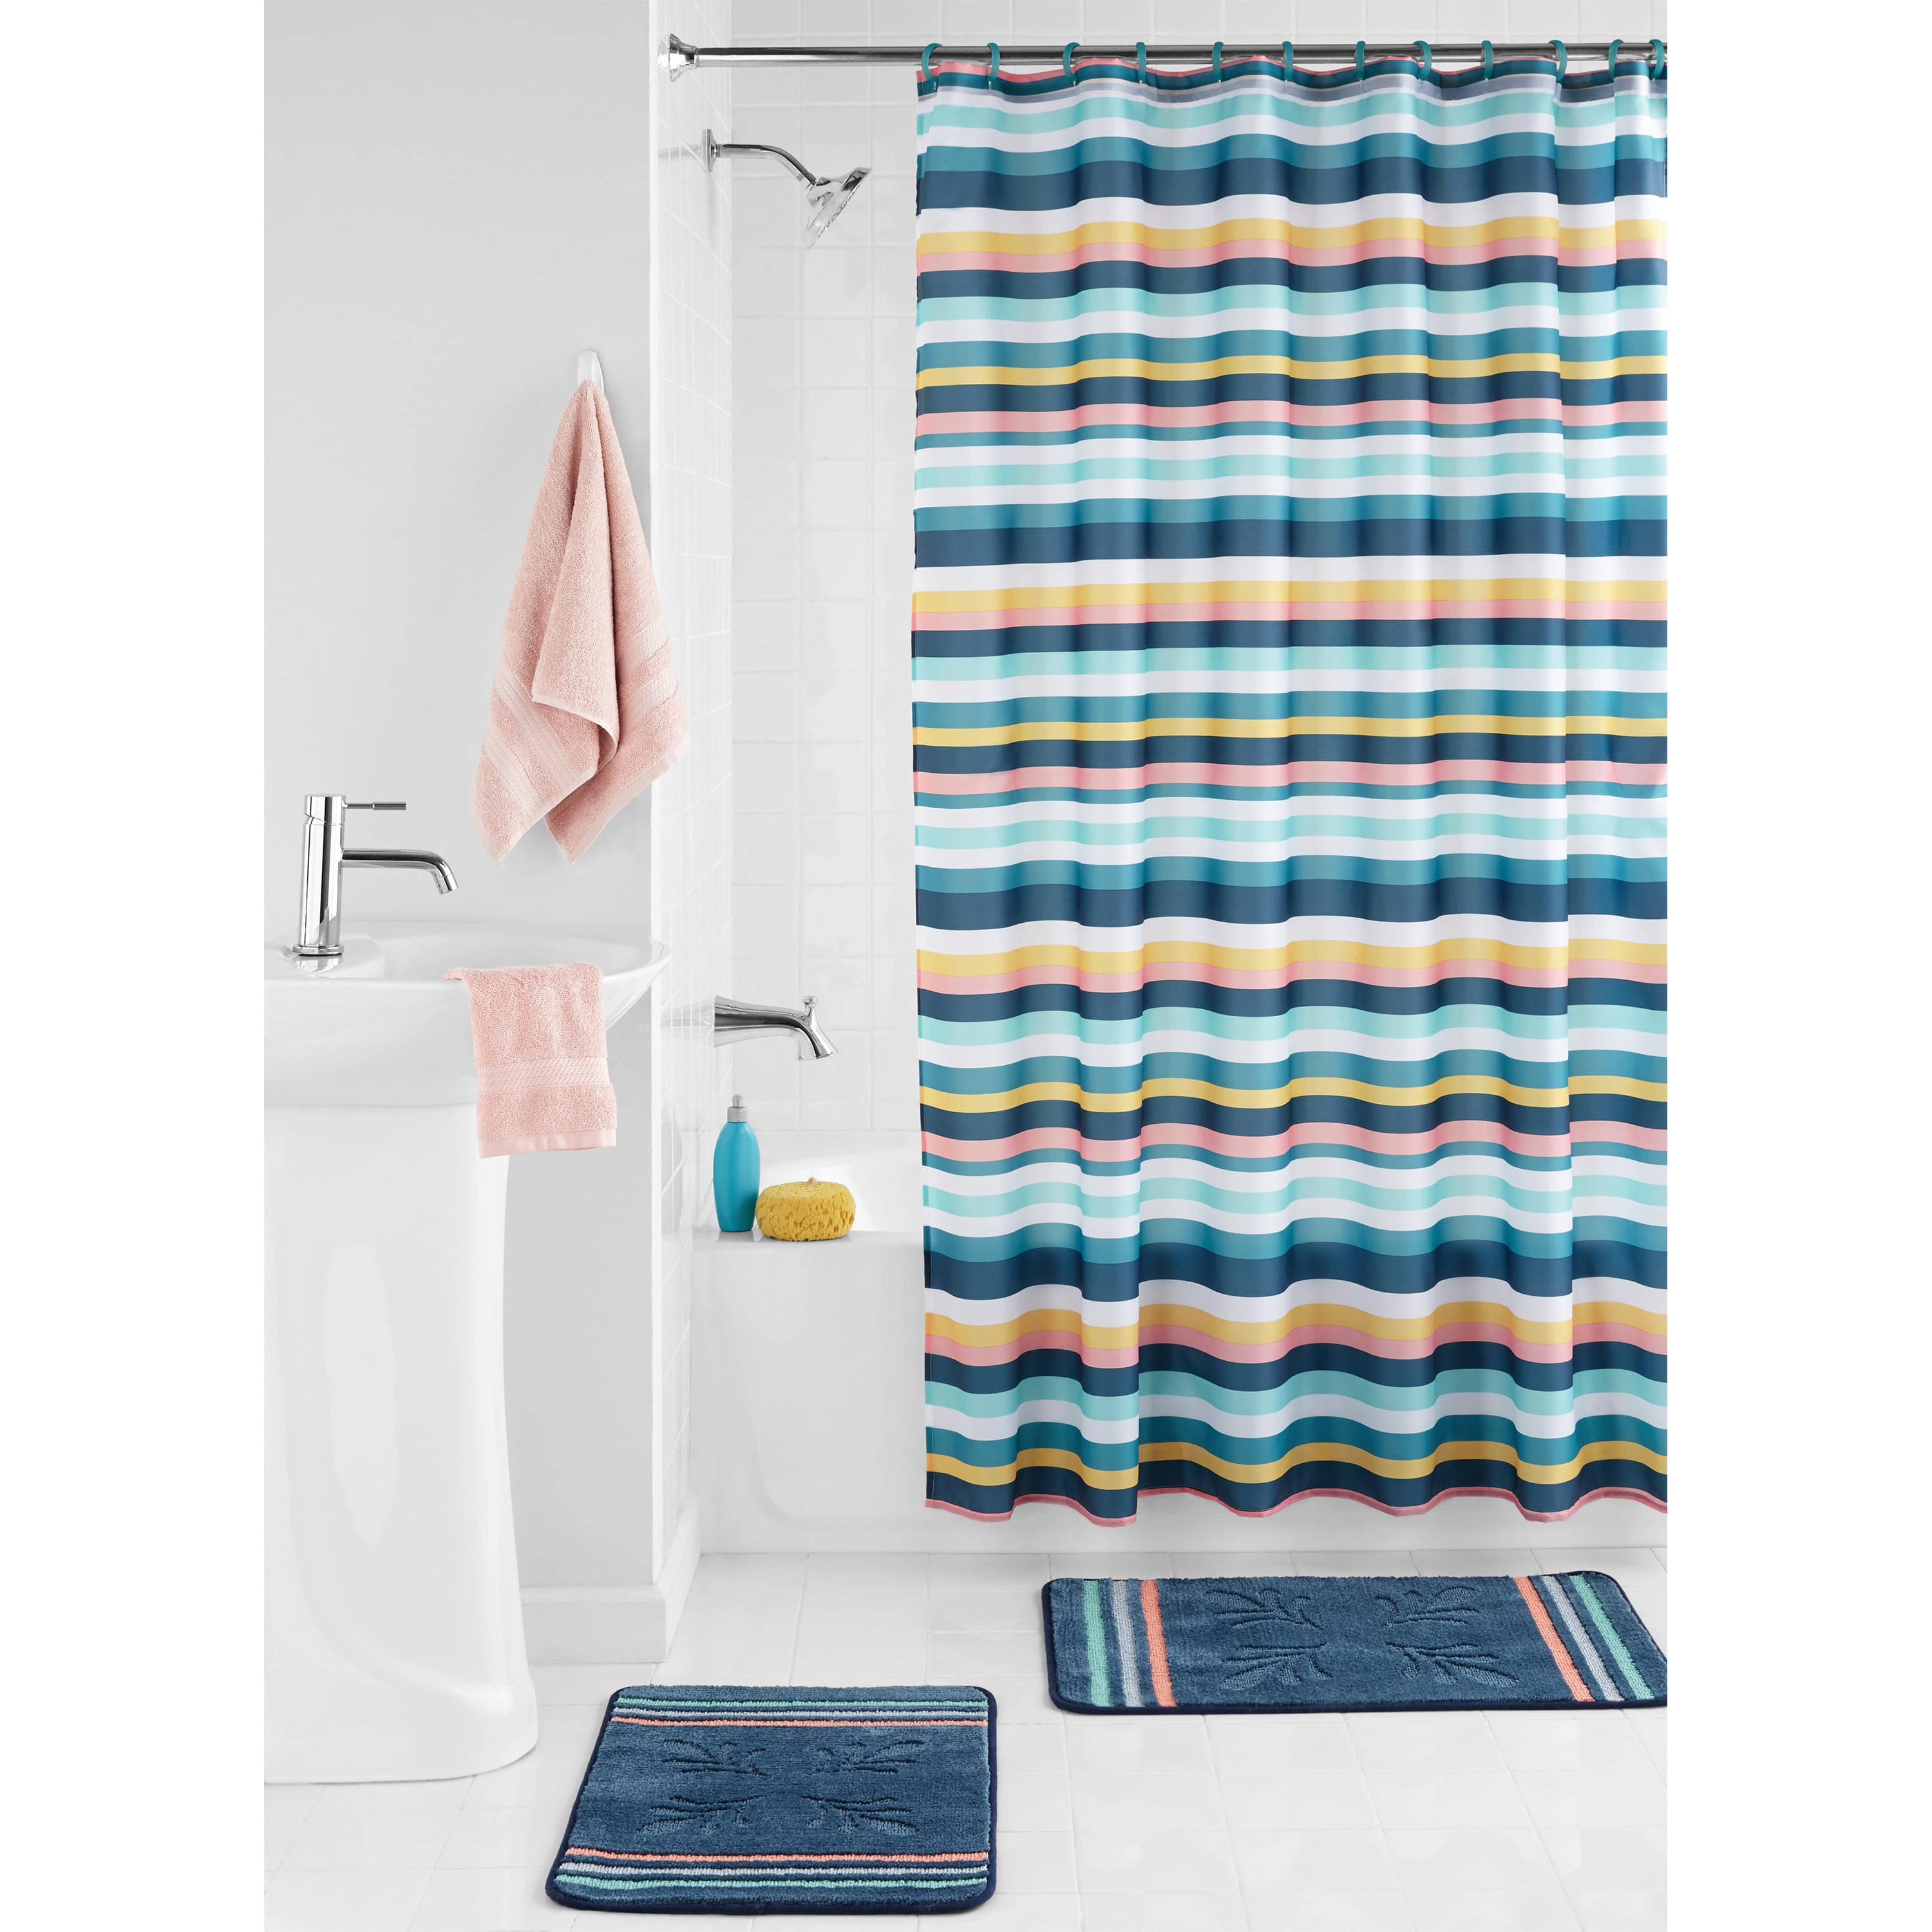 Mainstays Shower Curtain Set with Bath Rugs 15 Pieces Medici 